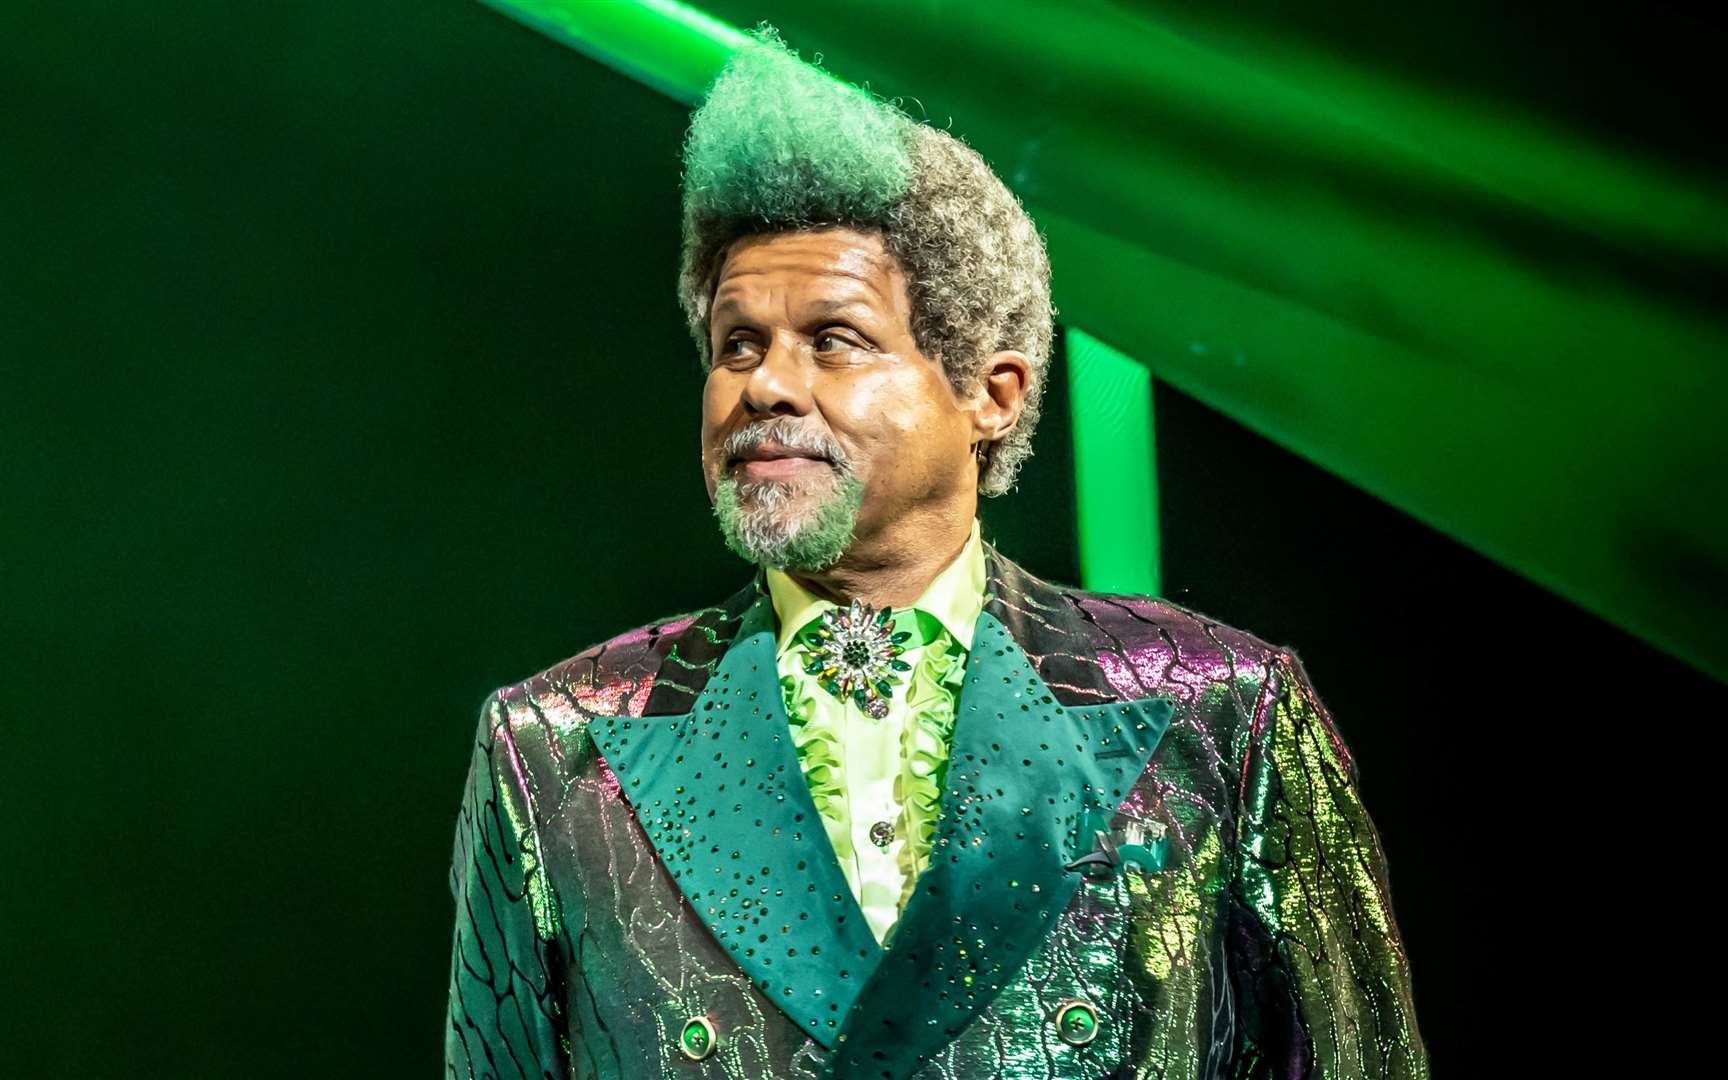 TV host, actor and comedian Gary Wilmot will once again star as The Wizard. Picture: Marc Brenner